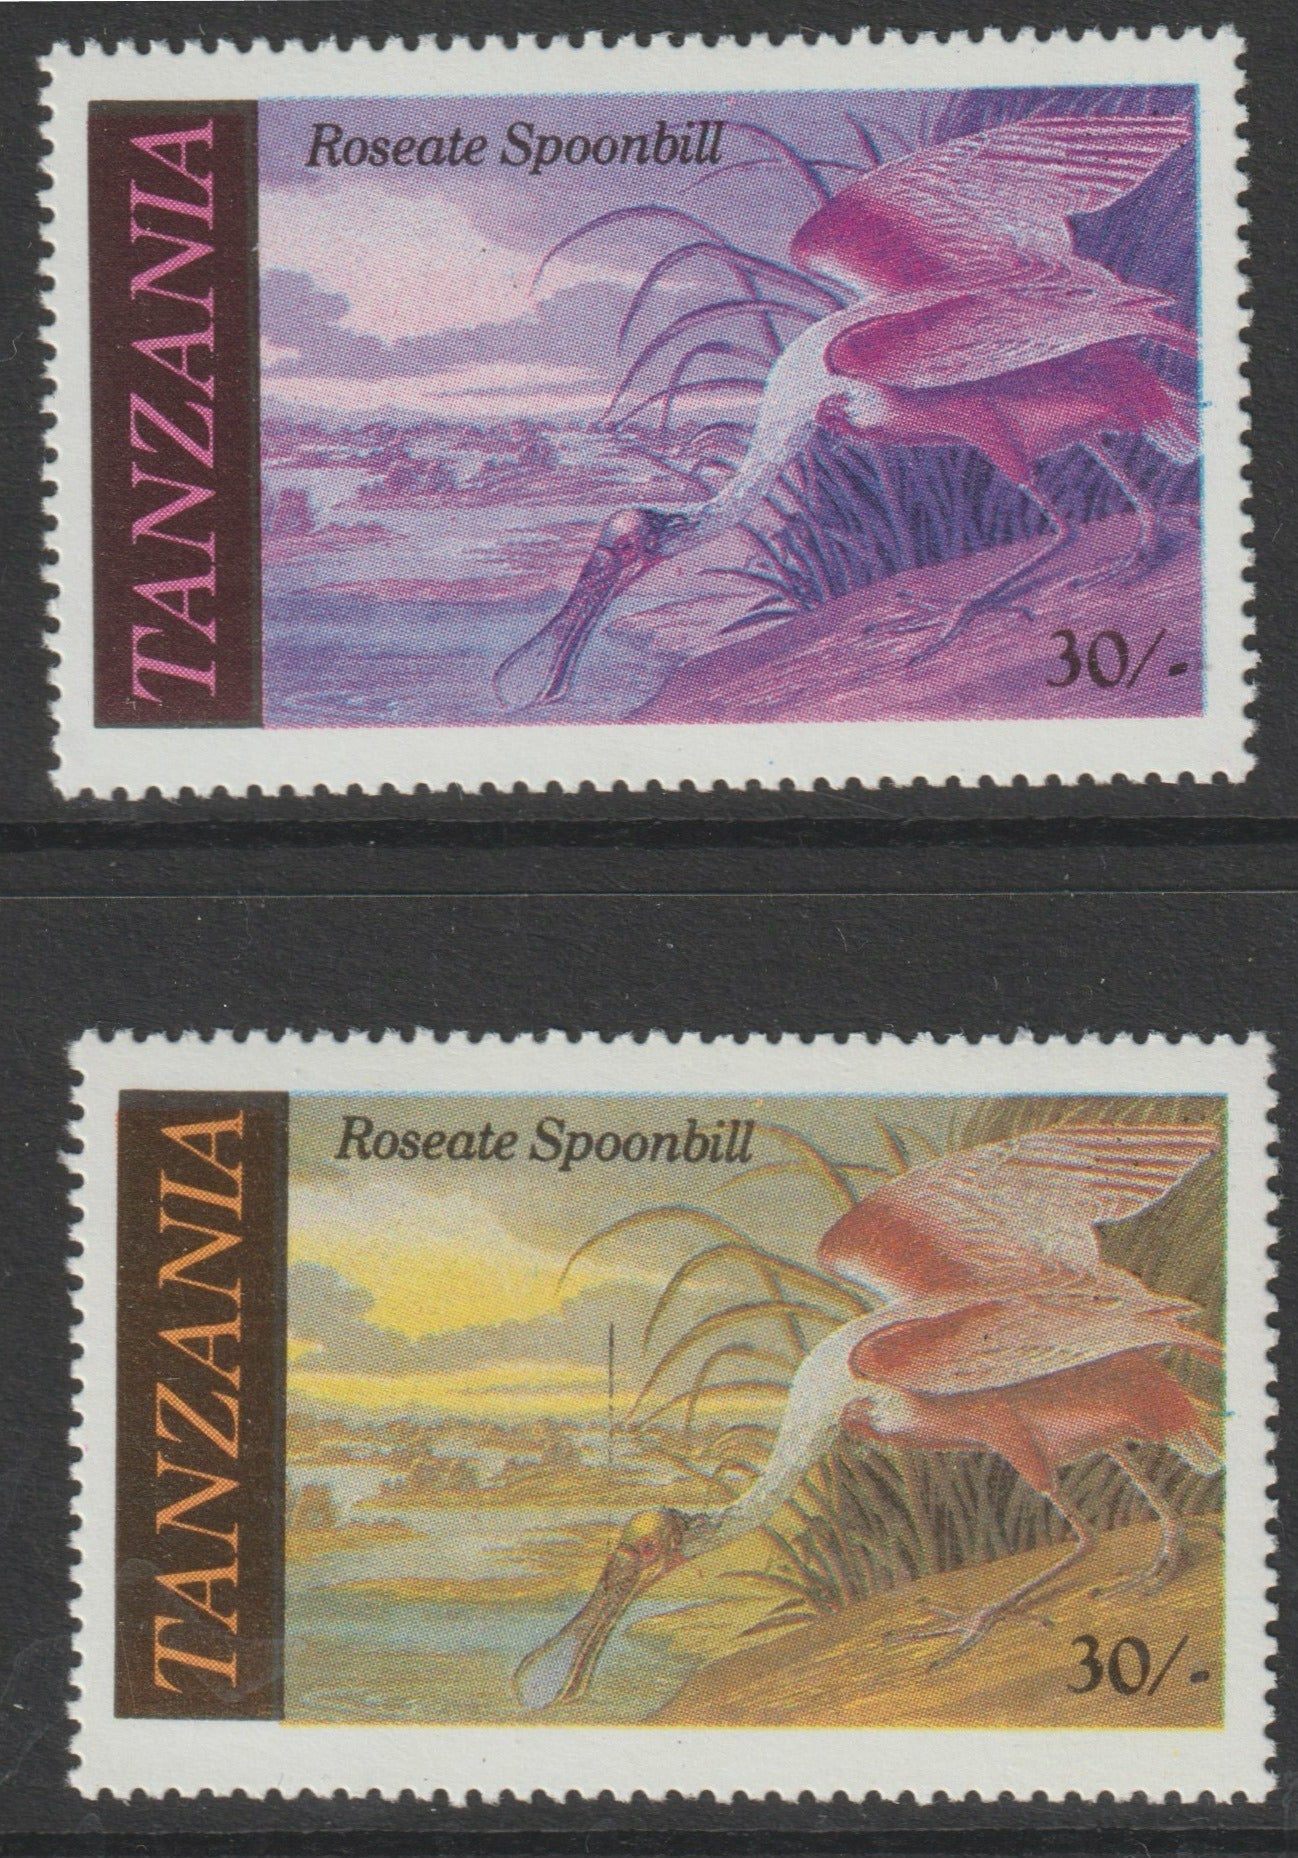 Tanzania 1986 John Audubon Birds 30s (Roseate Spoonbill) with yellow omitted, complete sheetlet of 8 plus normal sheet, both unmounted mint (as SG 467)